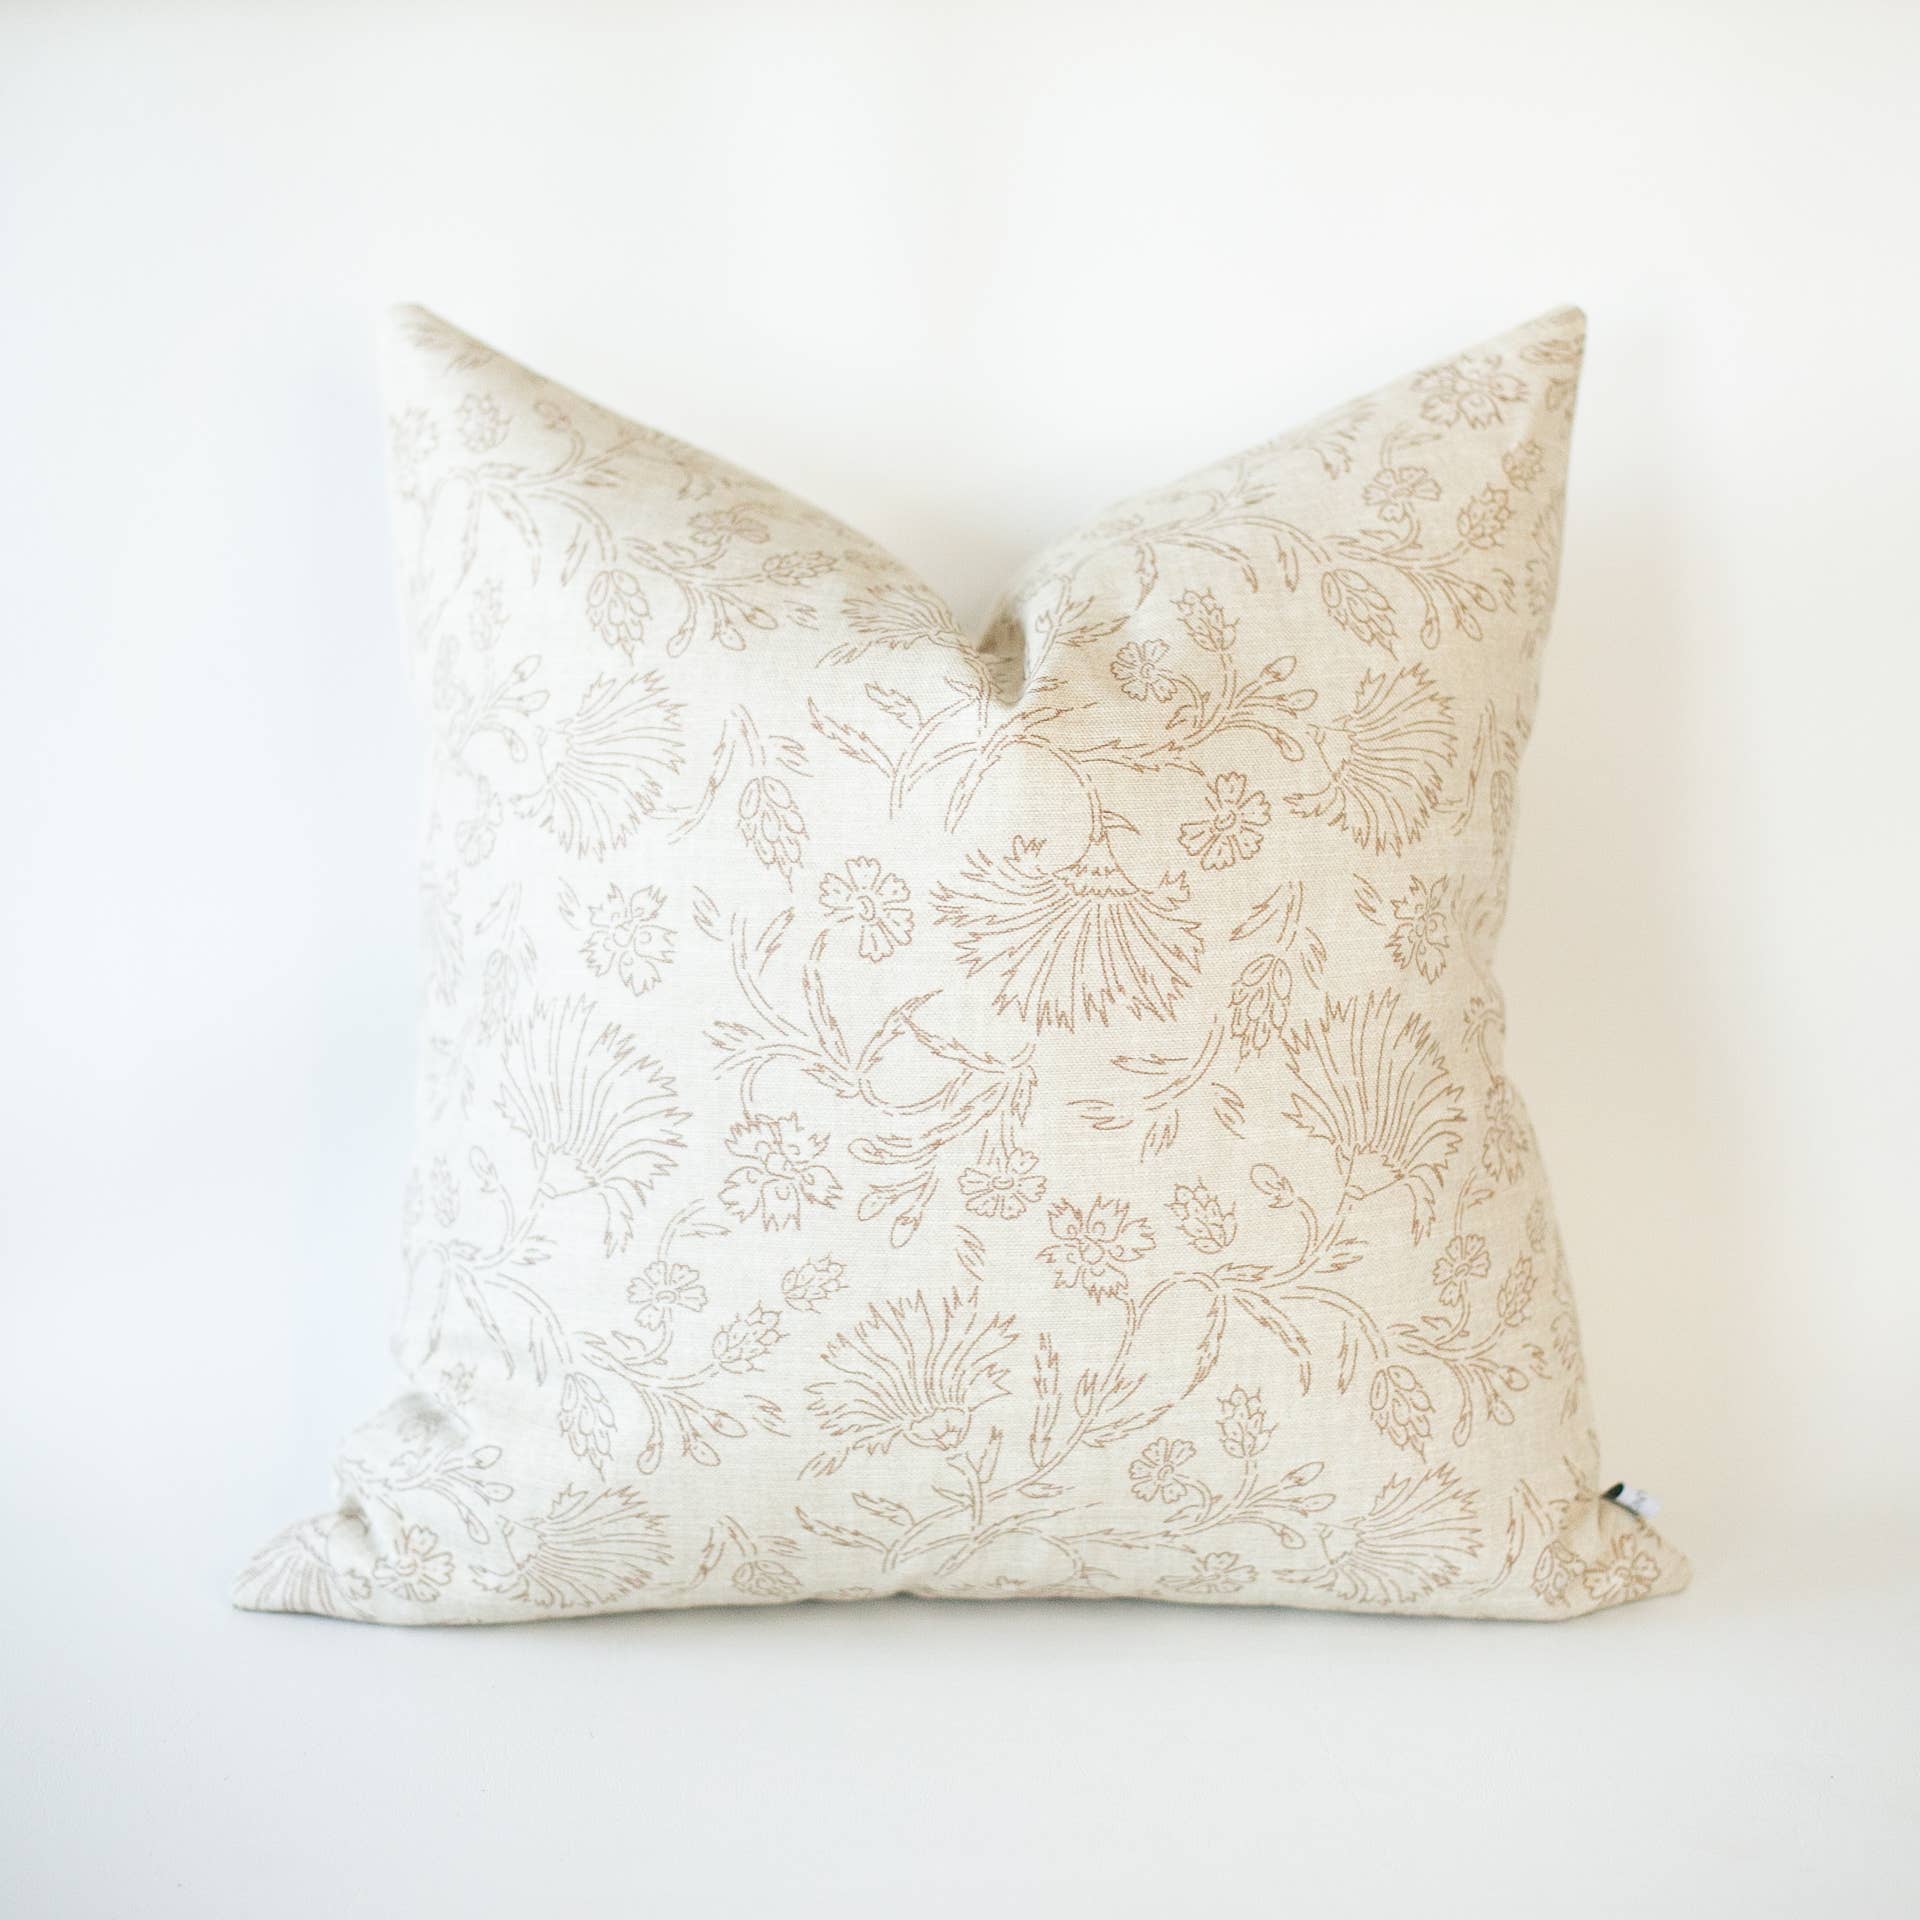 Ella pillow cover, 18x18 , neutral floral print perfect from spring through fall